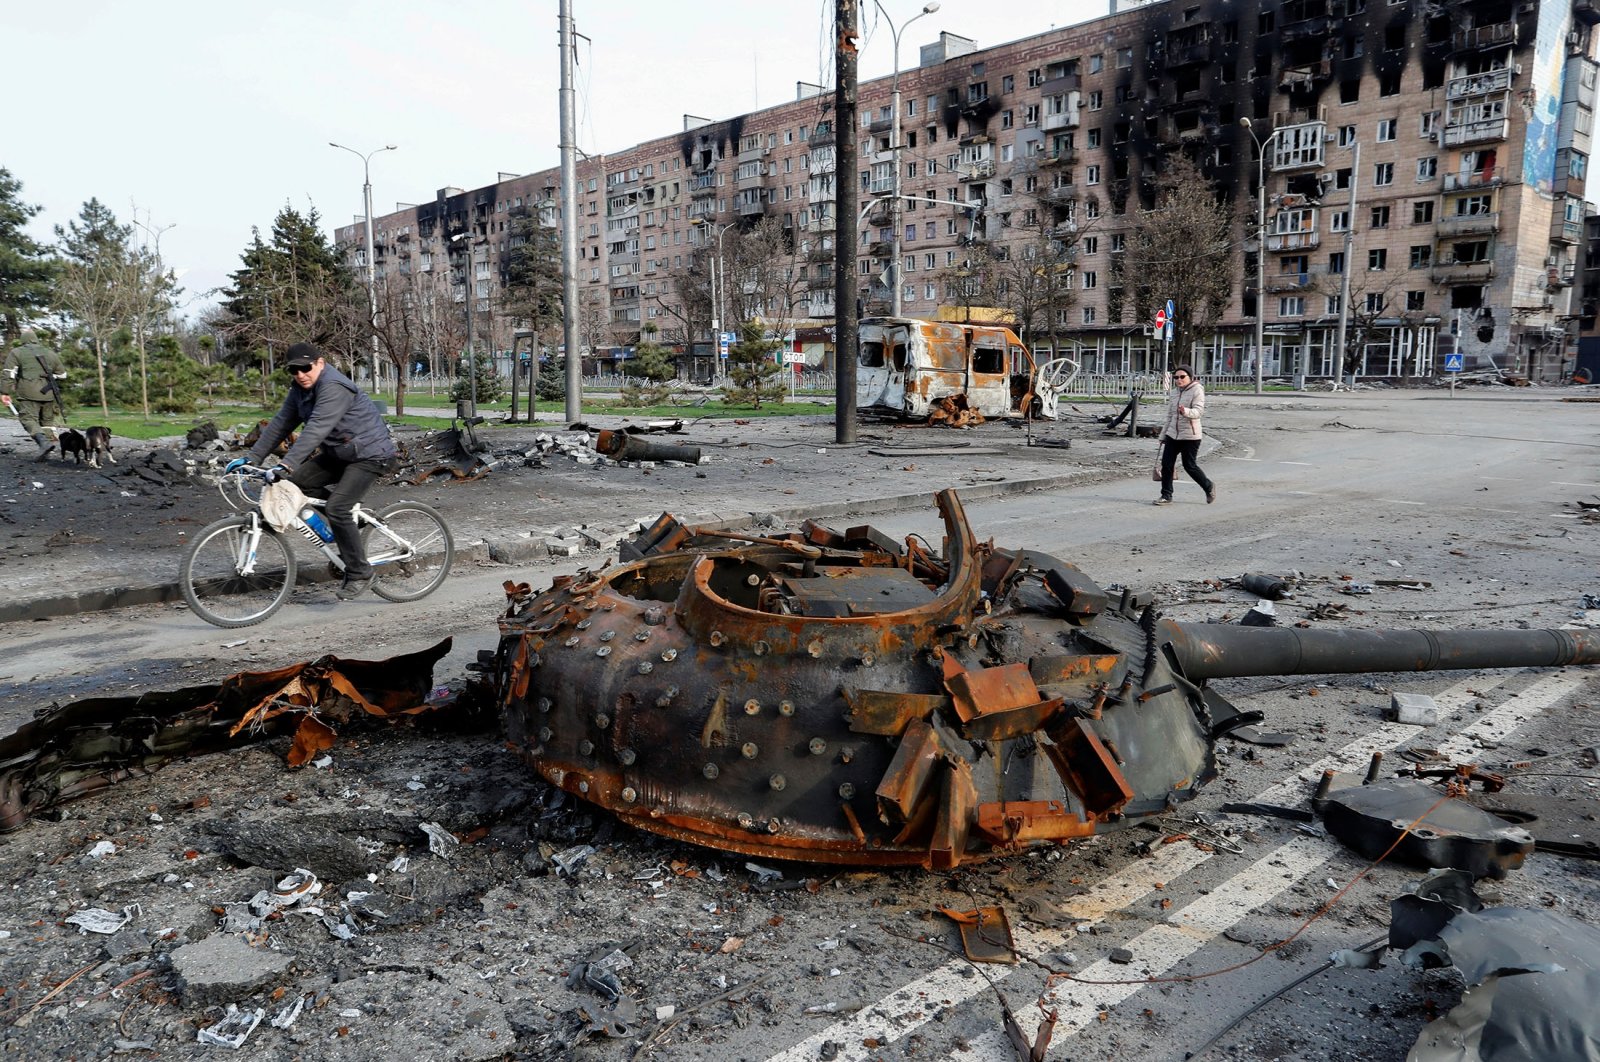 People walk past the turret of a tank, which was destroyed during Ukraine-Russia conflict in the southern port city of Mariupol, Ukraine, April 17, 2022. (Reuters Photo)